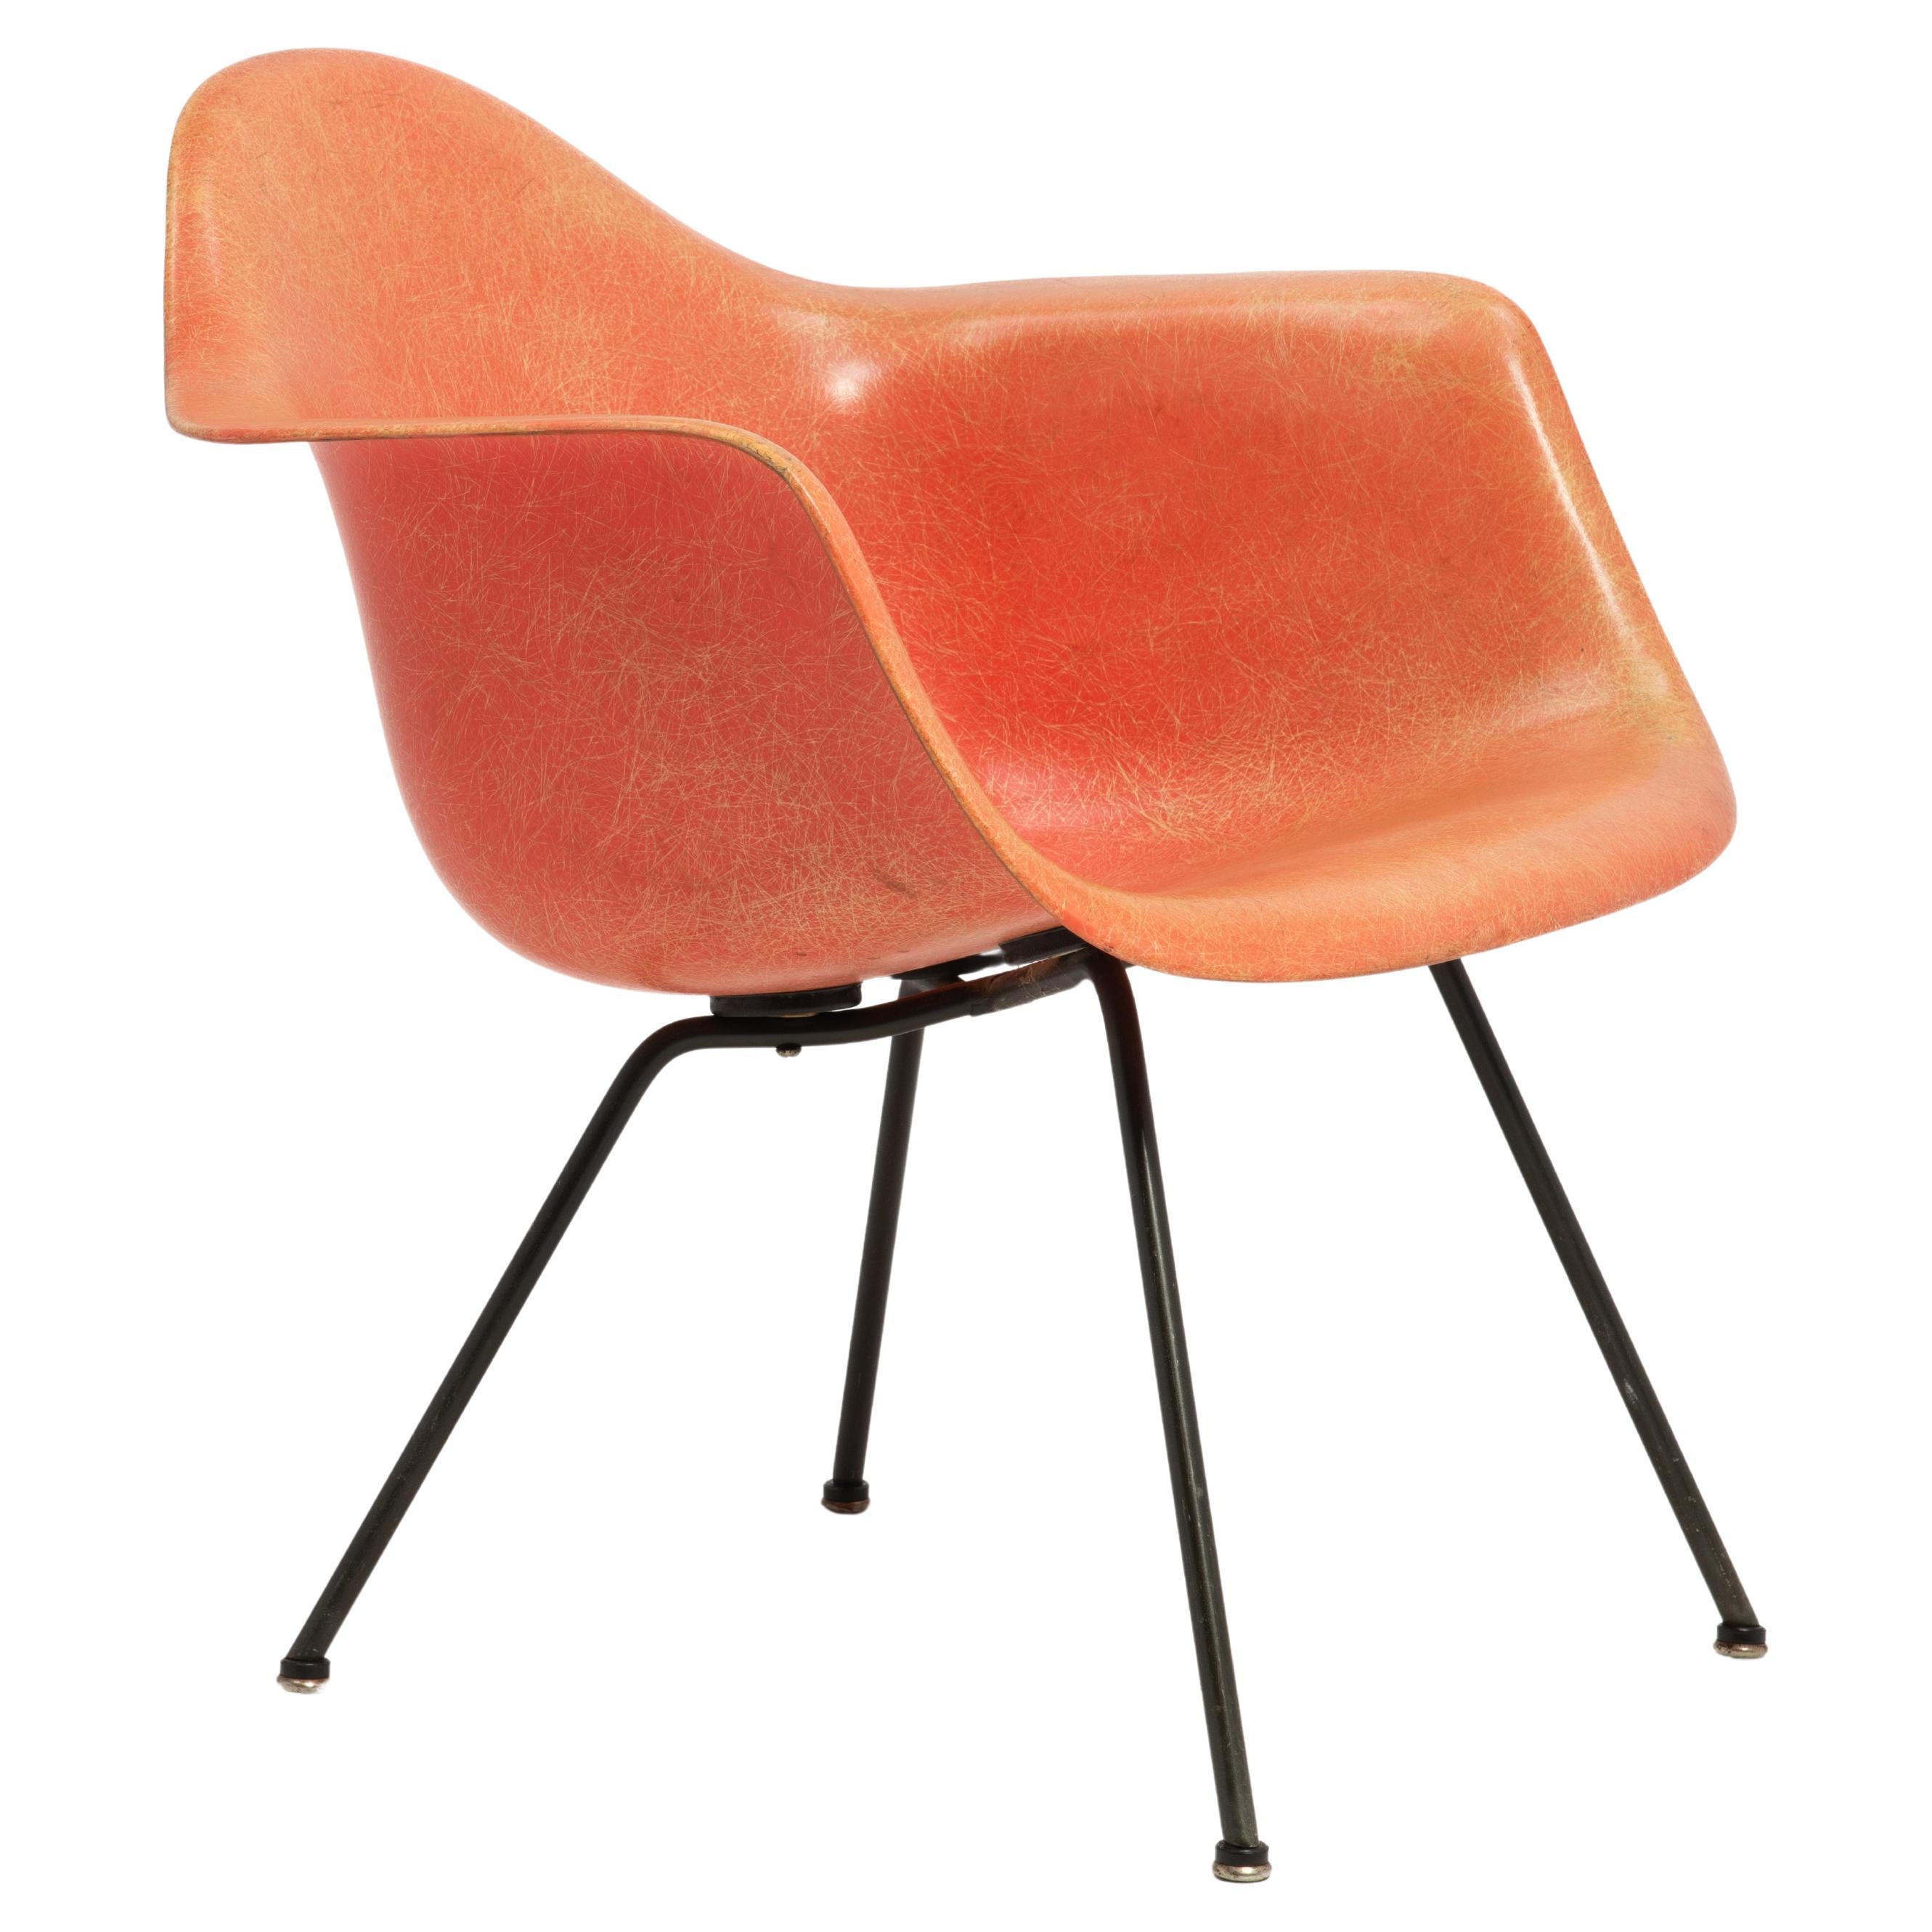 Charles and Ray Eames Herman Miller Zenith Plastics Fauteuil LAX Rope Edge X Base en vente